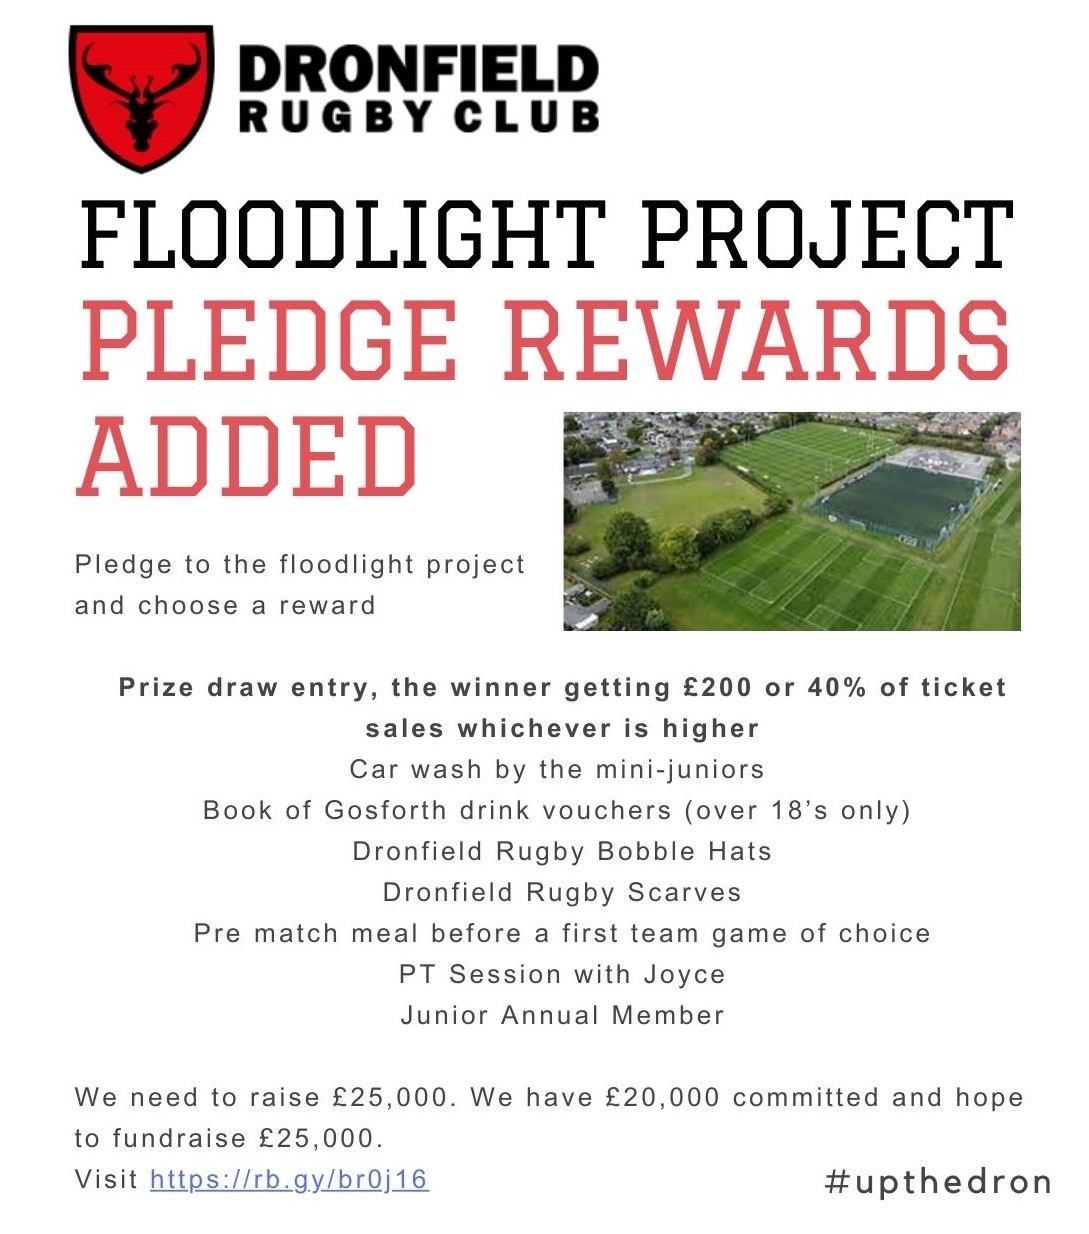 Floodlights Project - Image